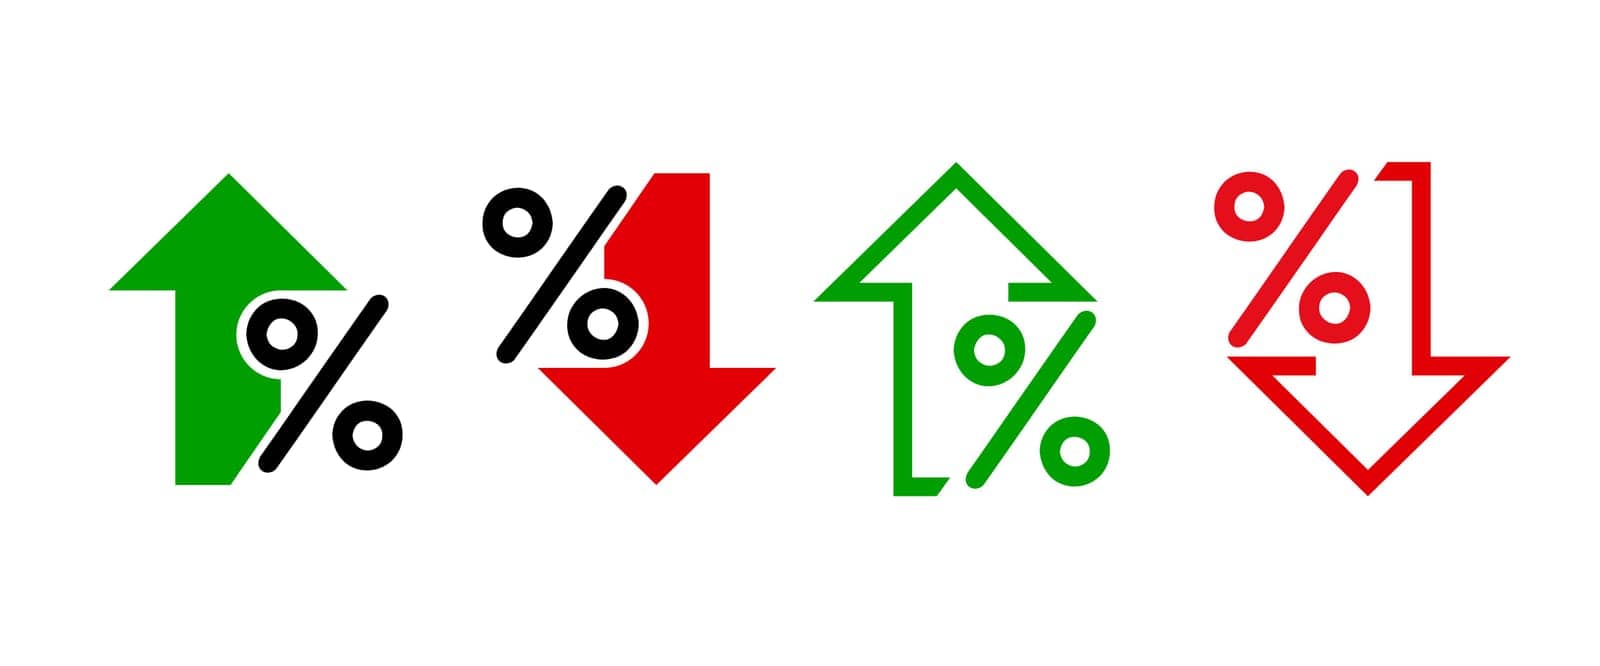 Percentage growth and decline icons. Percent arrow up and down flat style symbols - vector . Vector illustration